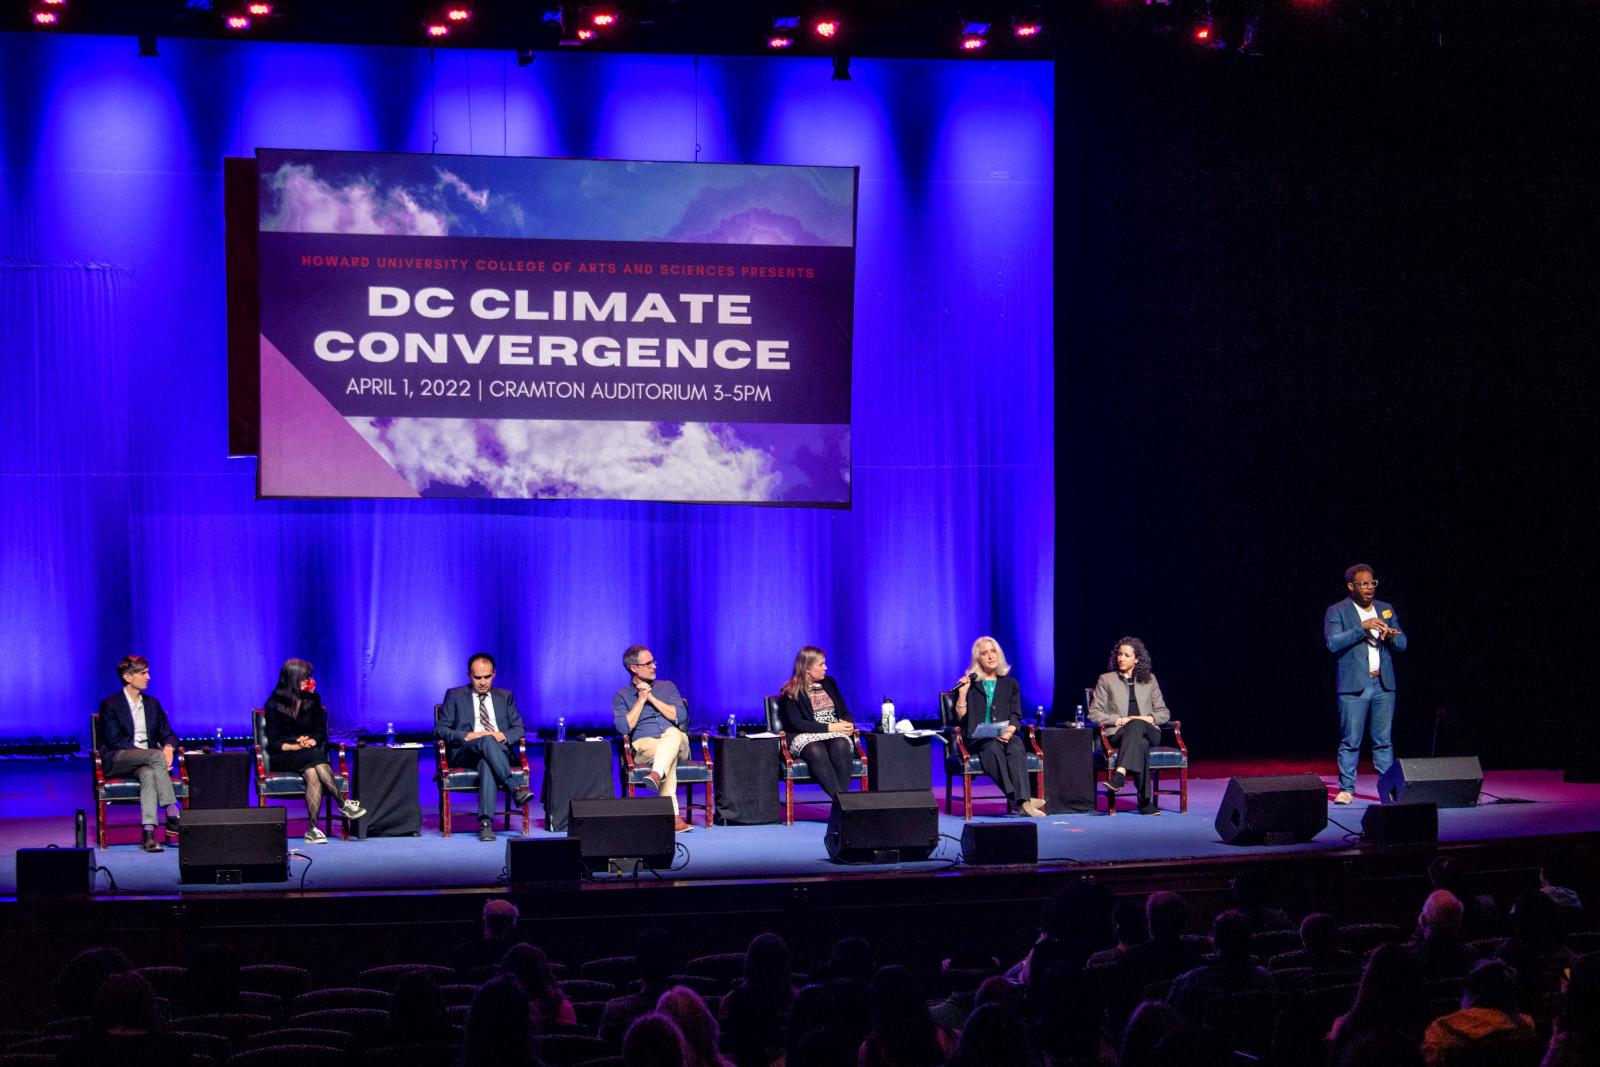 DC Climate Convergence 